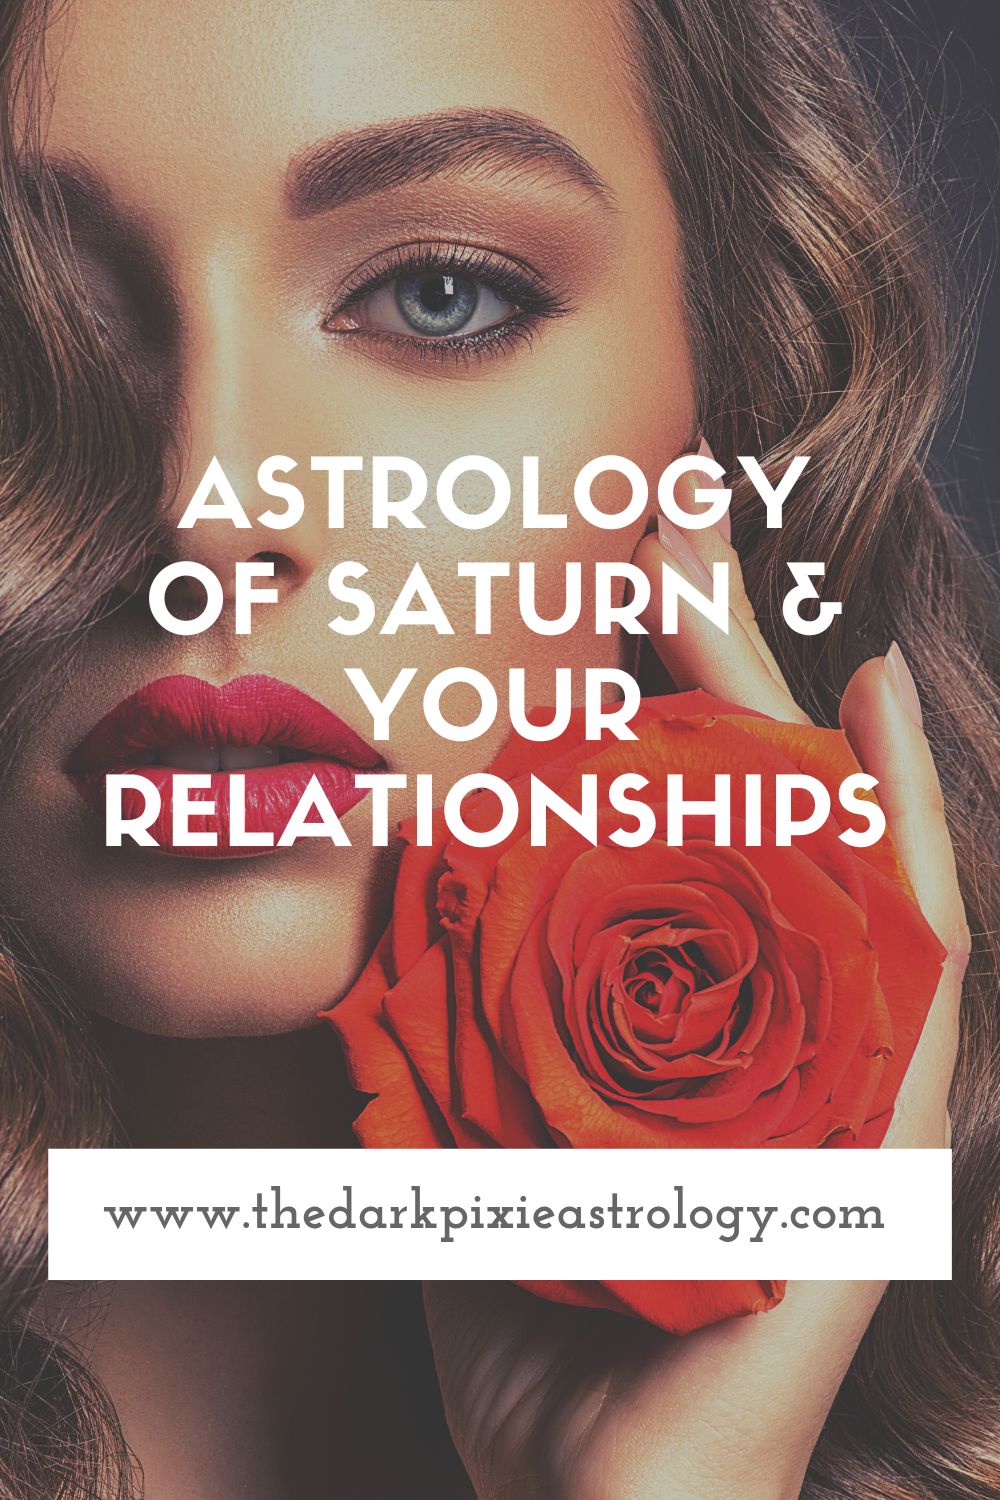 Astrology of Saturn & Your Relationships - The Dark Pixie Astrology